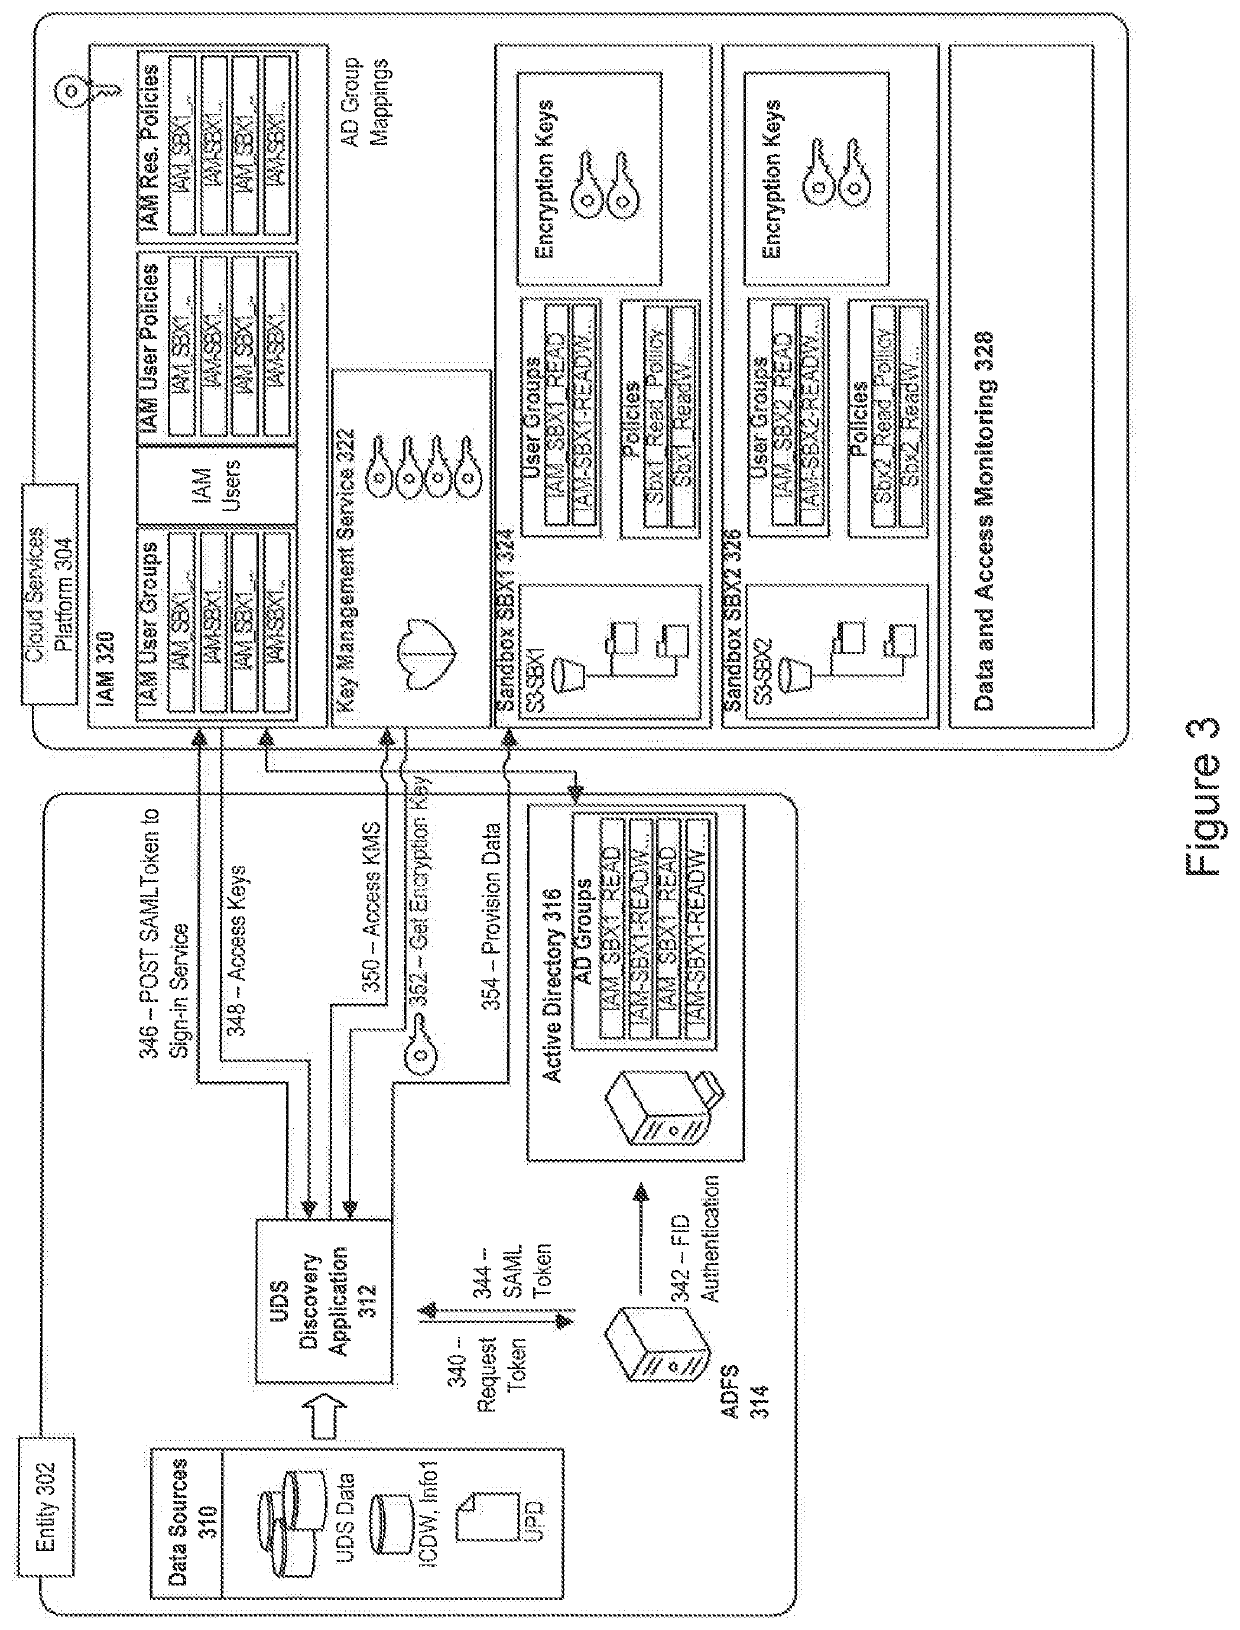 Method and system for implementing a cloud machine learning environment